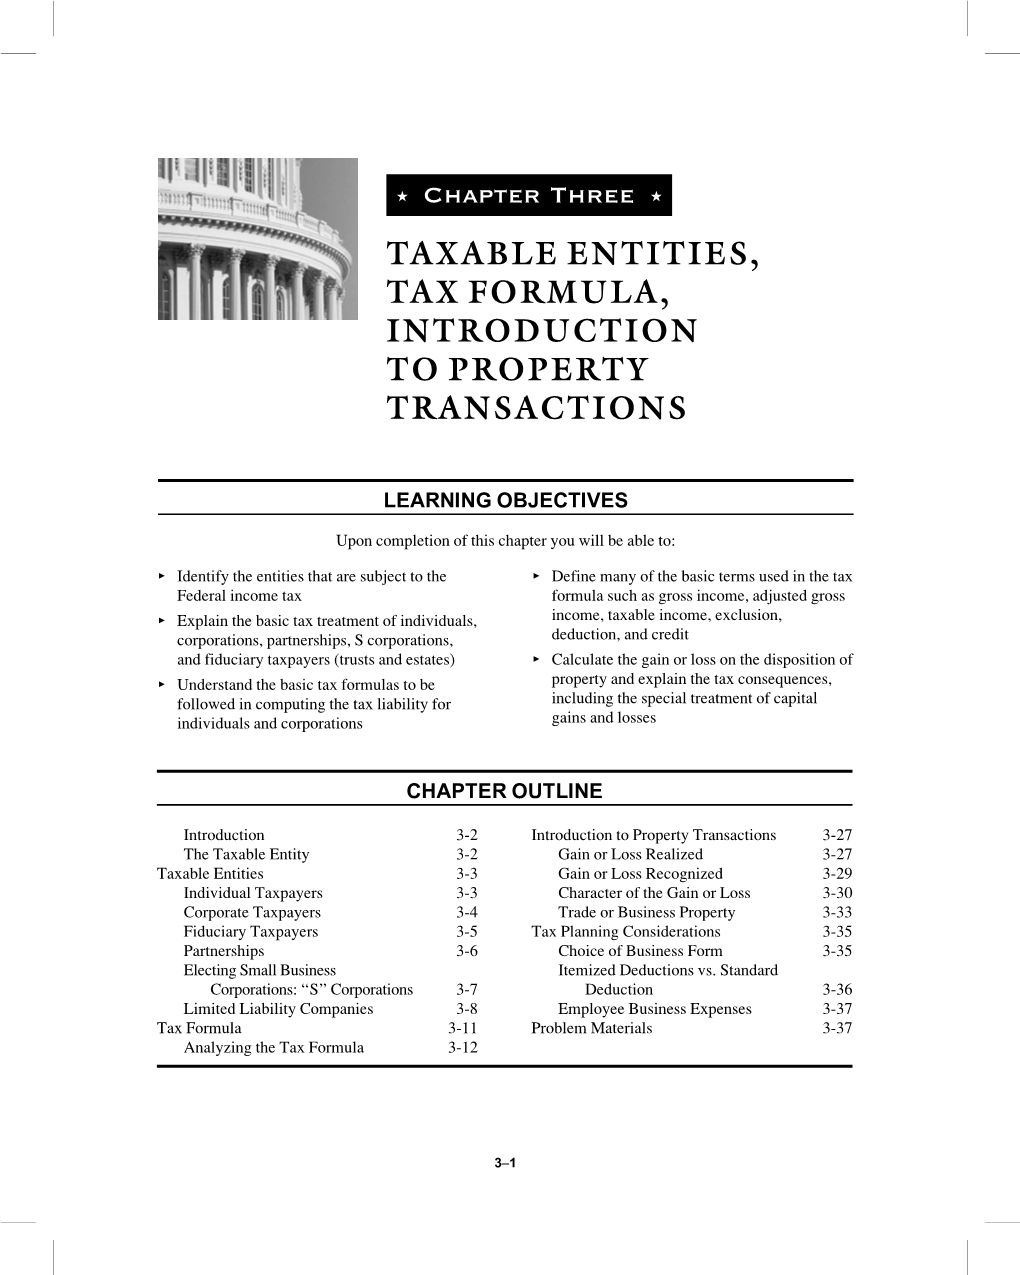 Taxable Entities, Tax Formula, Introduction to Property Transactions